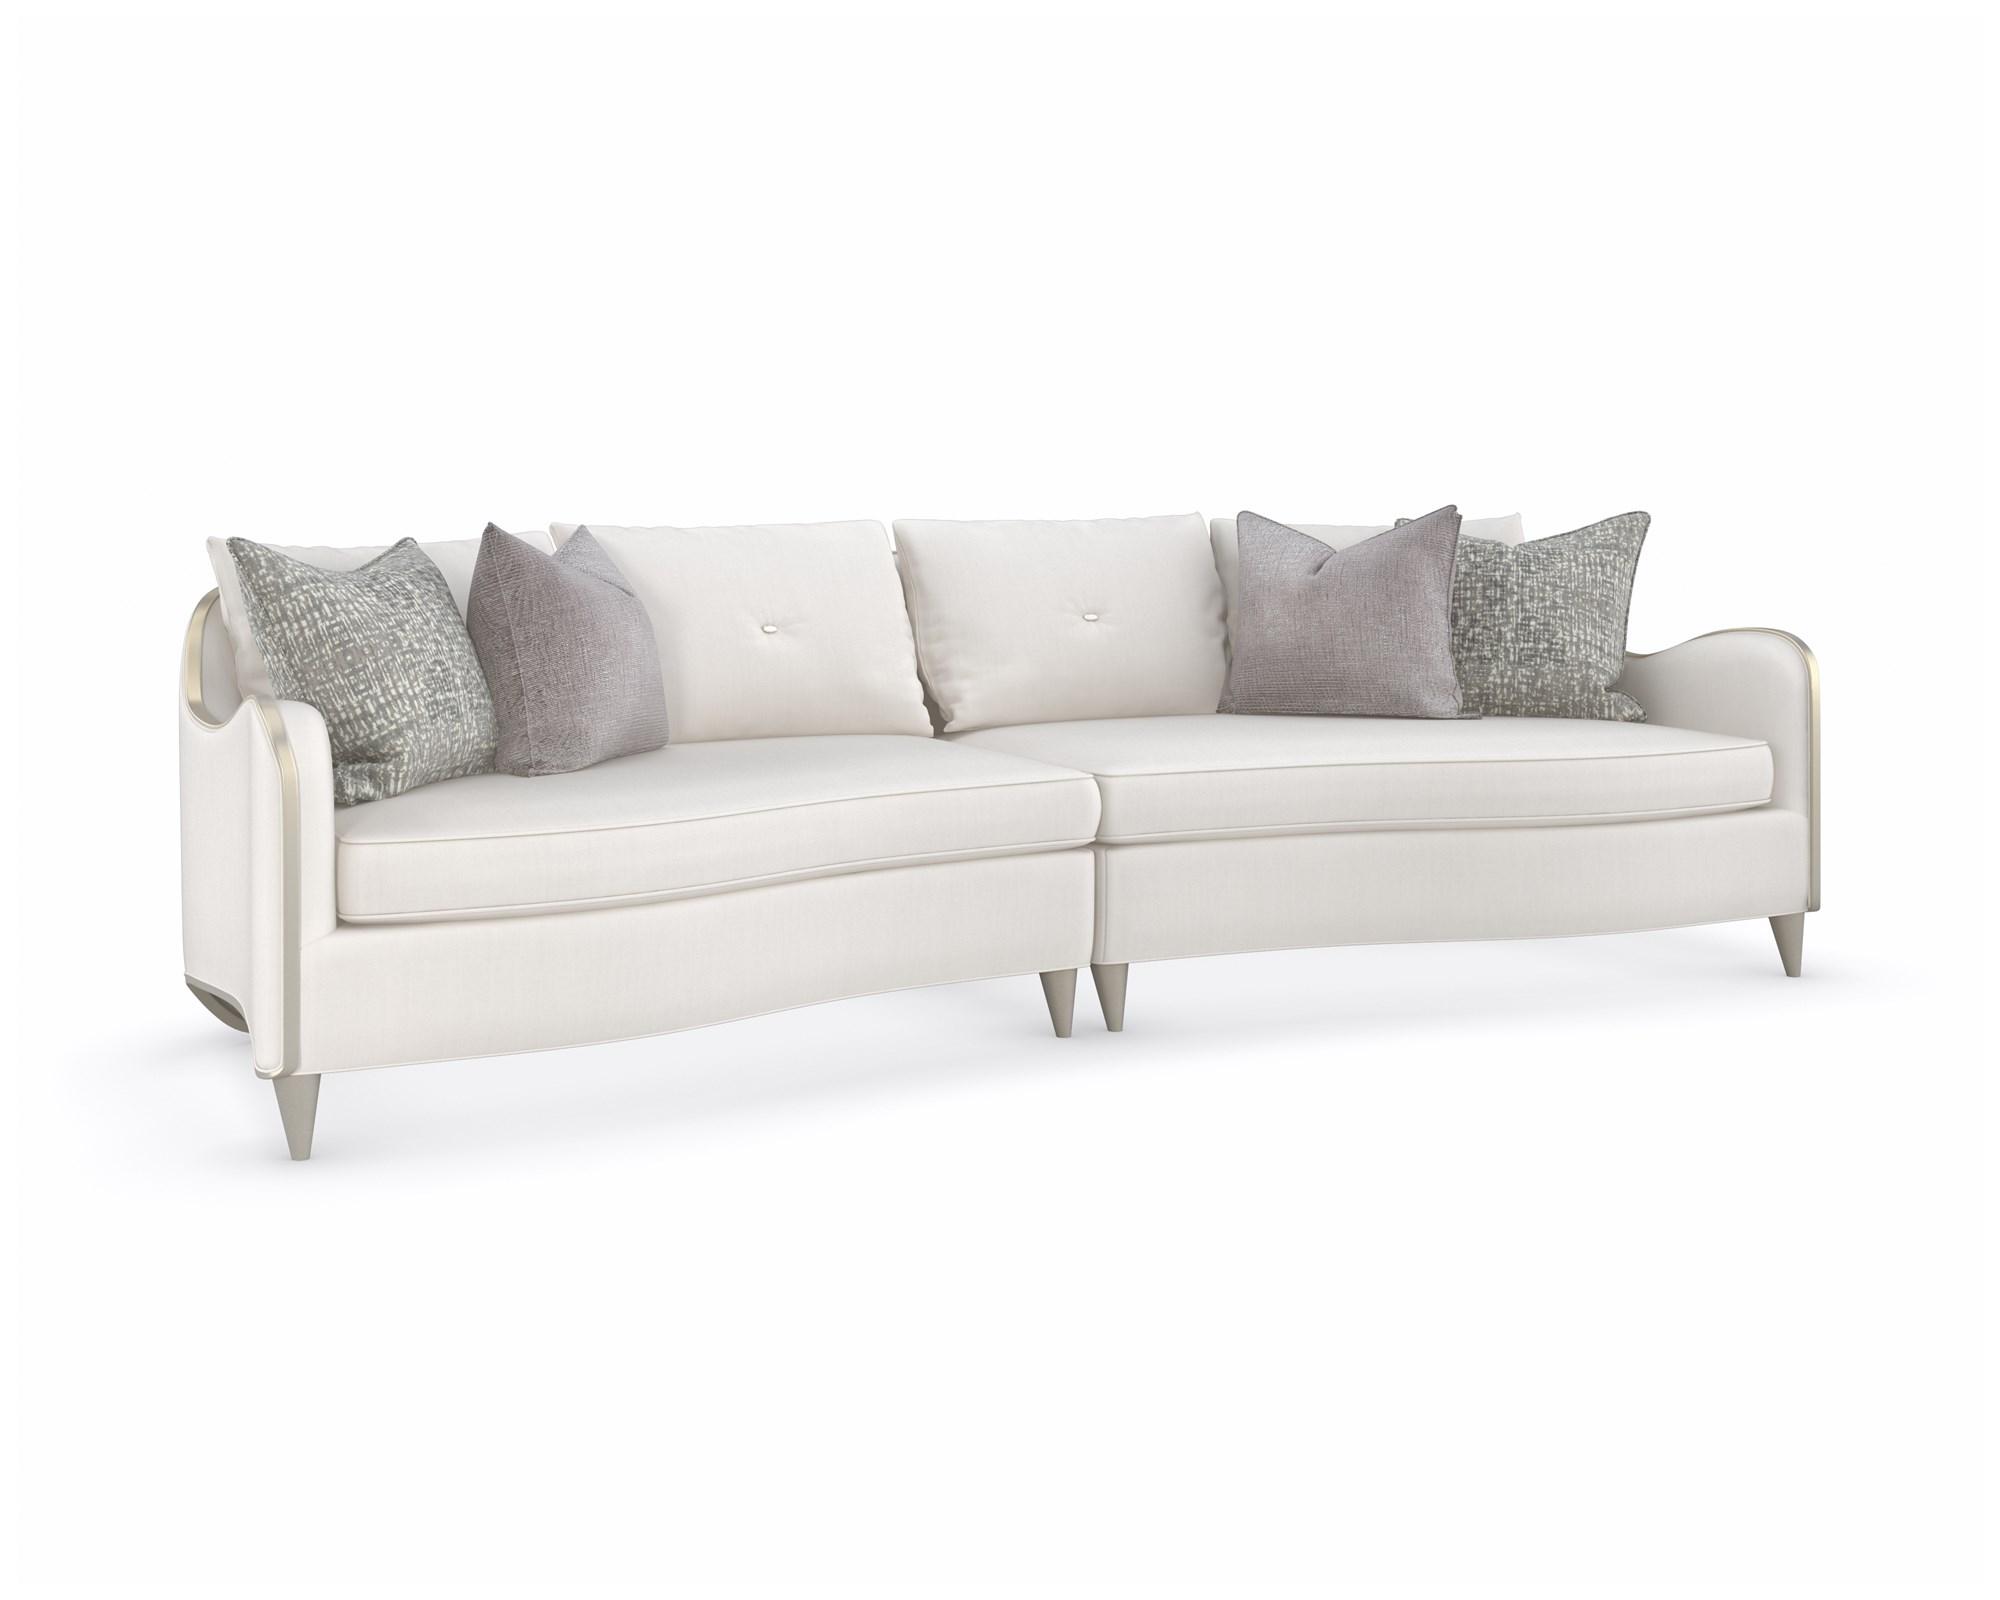 Traditional Sectional Sofa LILLIAN C090-020-LS1-A C090-020-RS1-A in Taupe, Silver Fabric